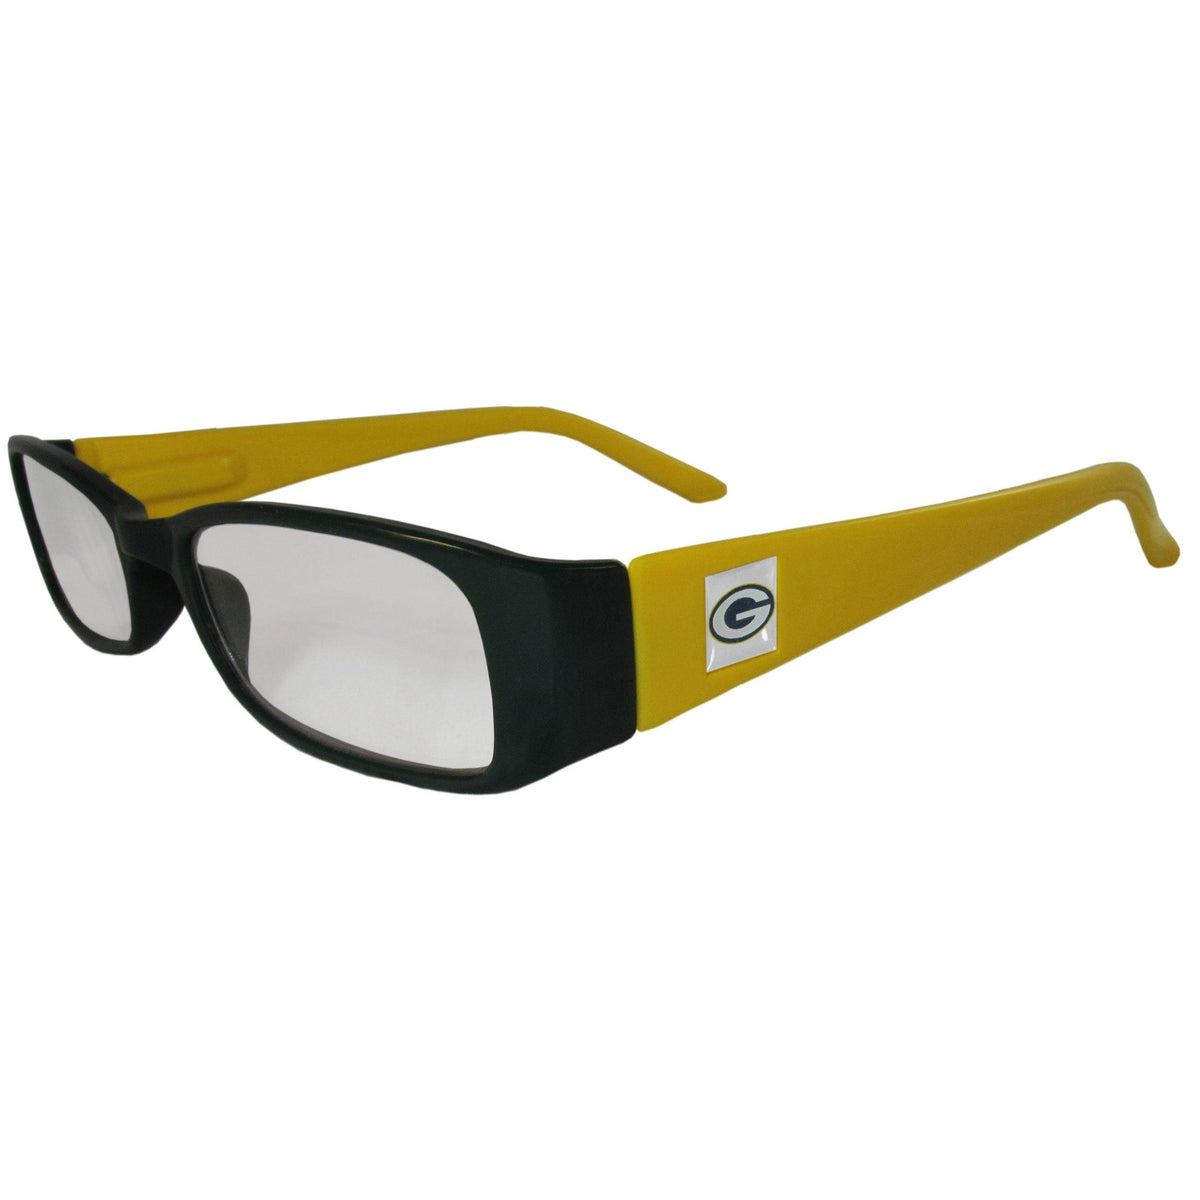 Green Bay Packers Reading Glasses +1.75 - Flyclothing LLC